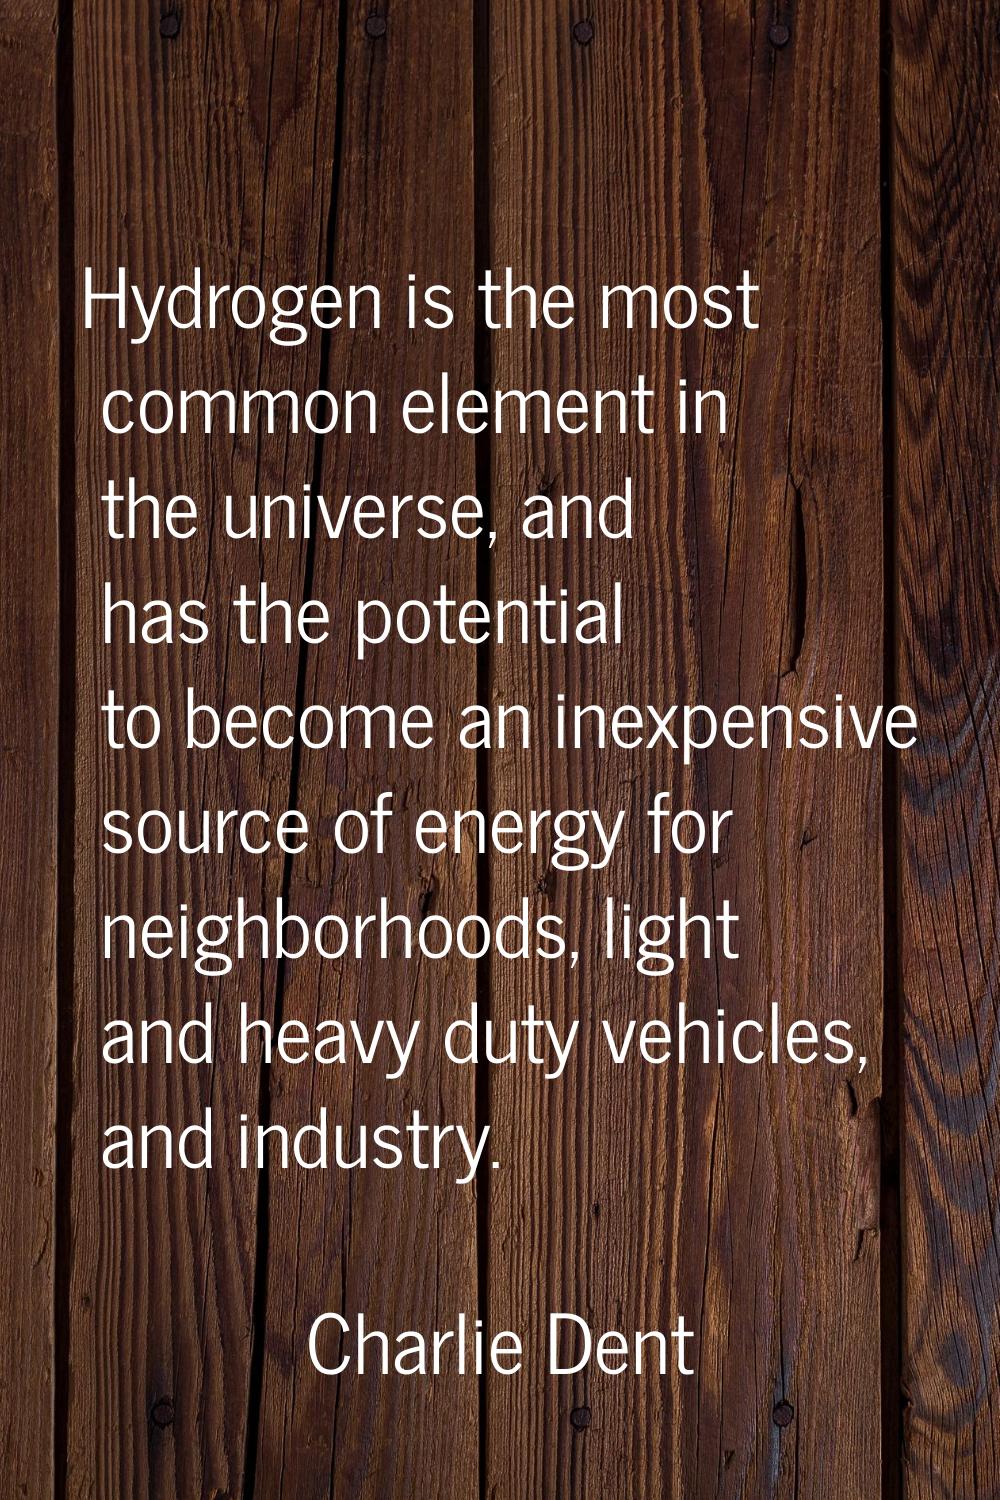 Hydrogen is the most common element in the universe, and has the potential to become an inexpensive